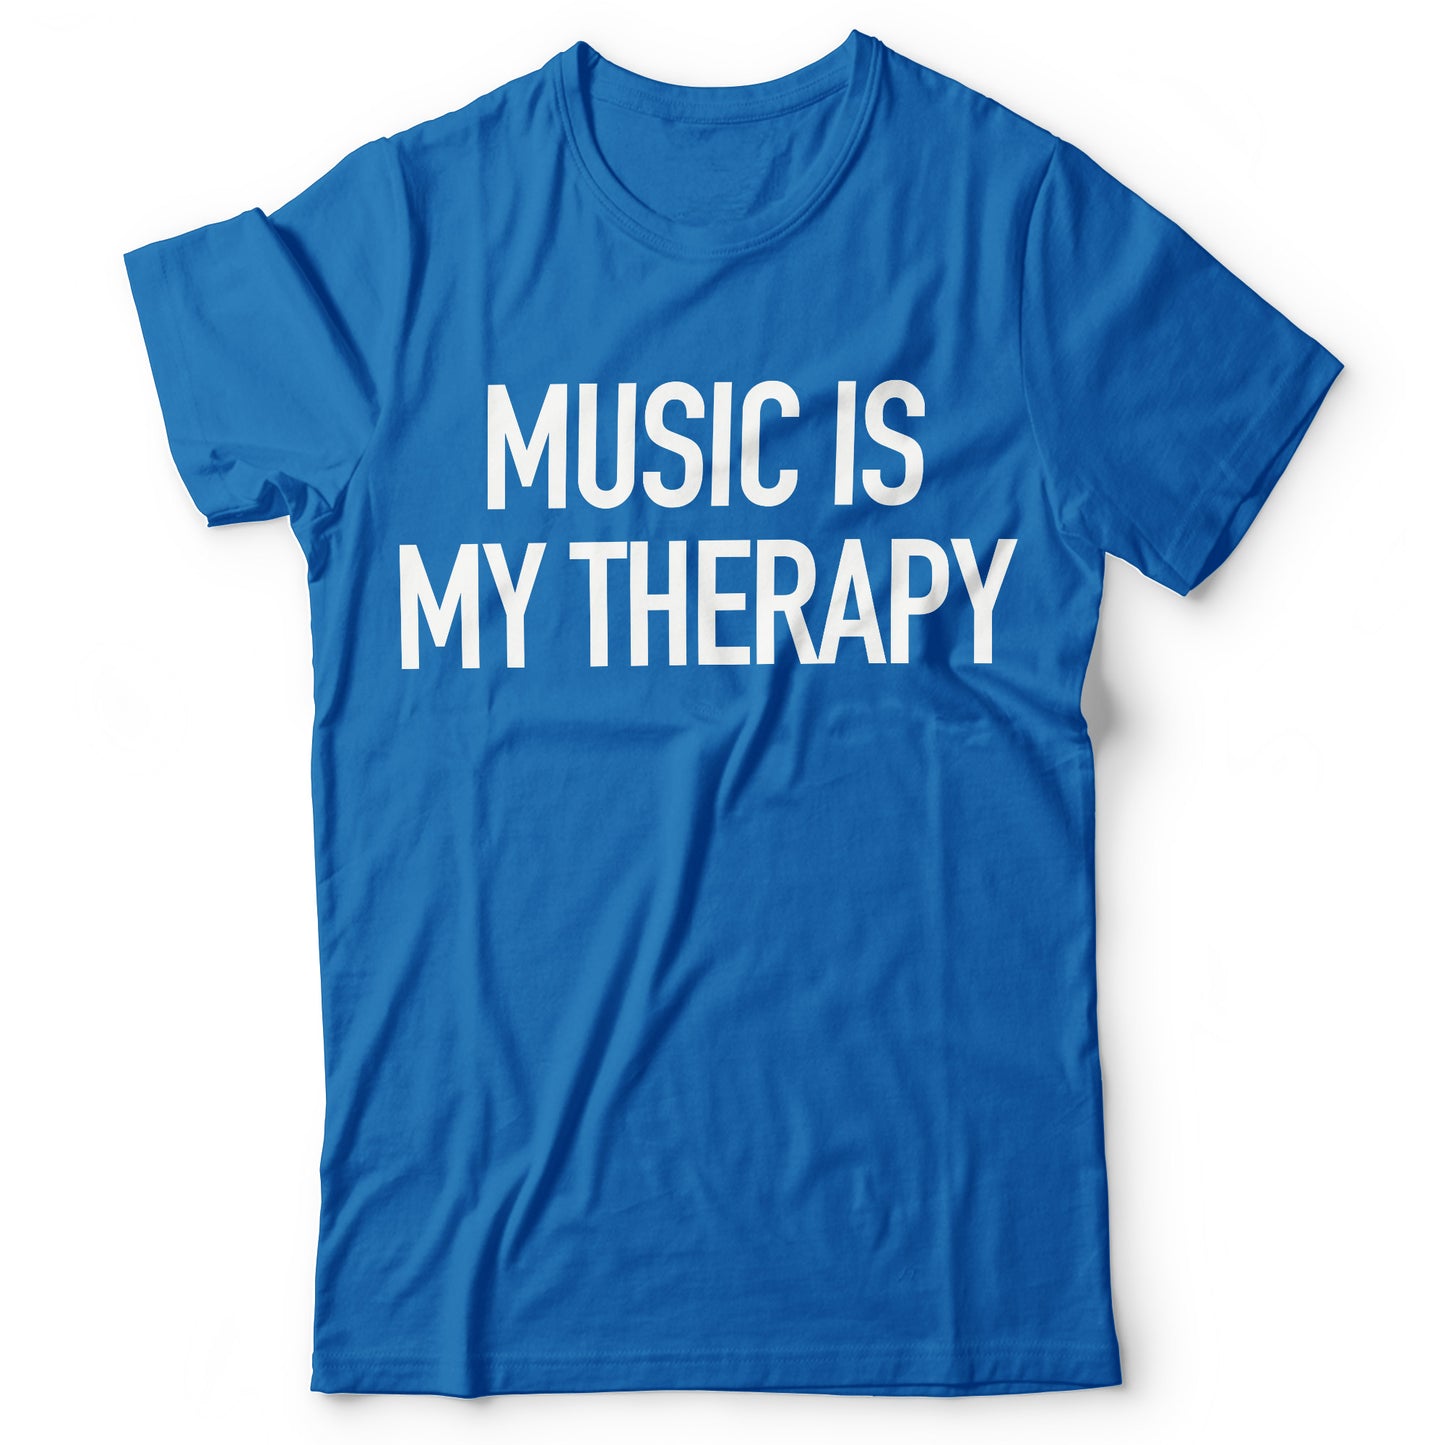 Music is My Therapy - T-shirt